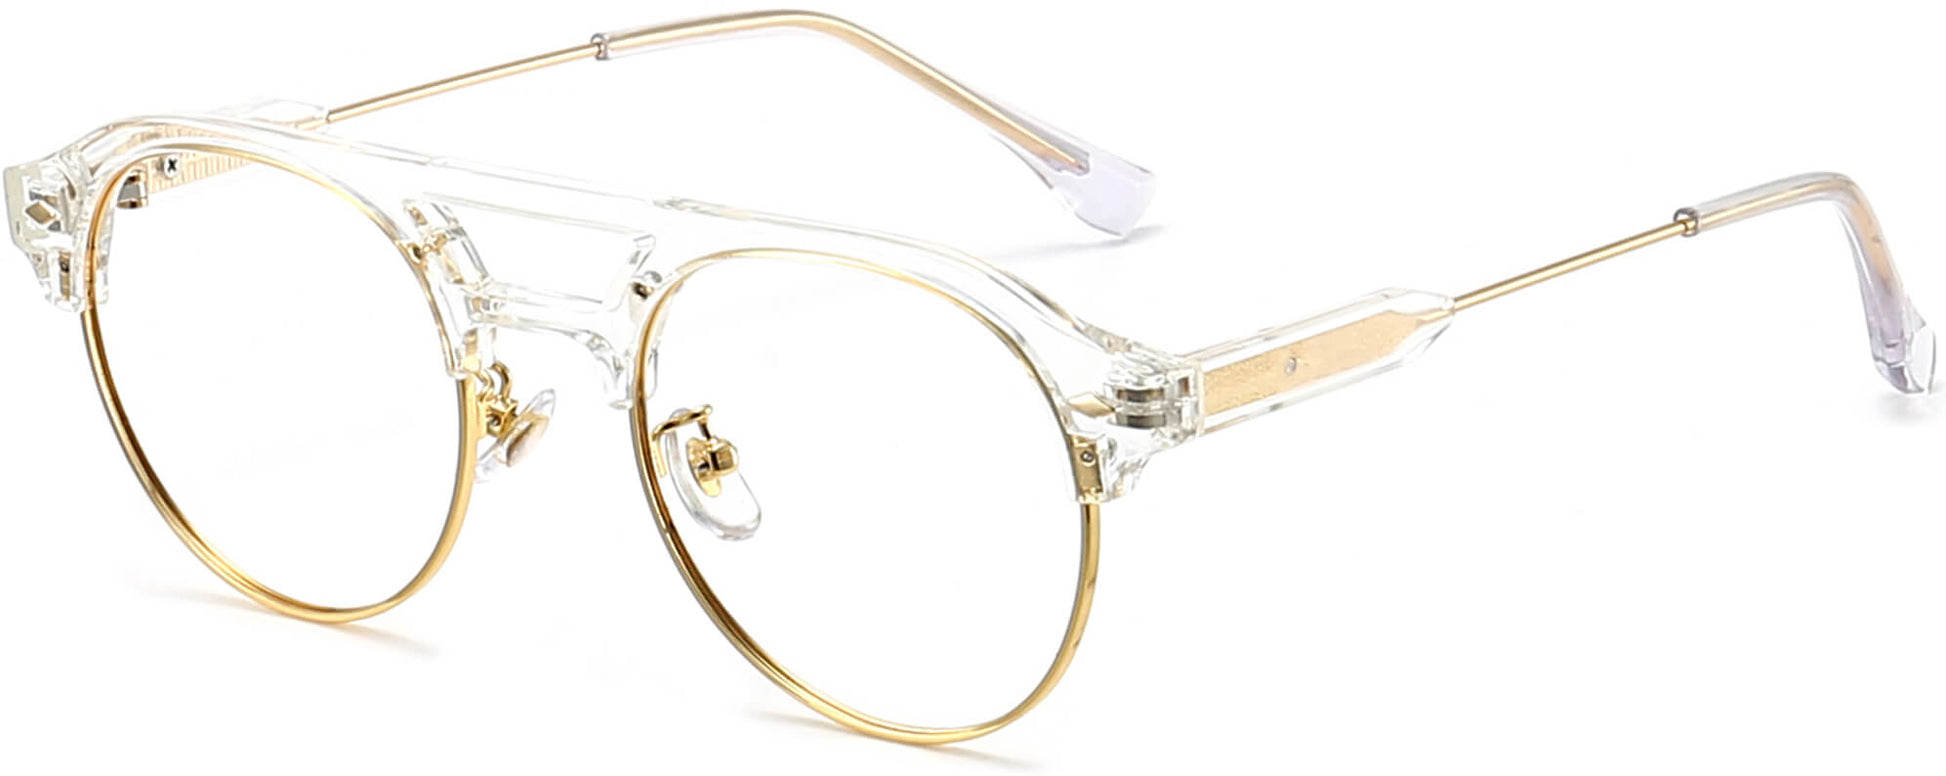 Kason Round Clear Eyeglasses from ANRRI, angle view